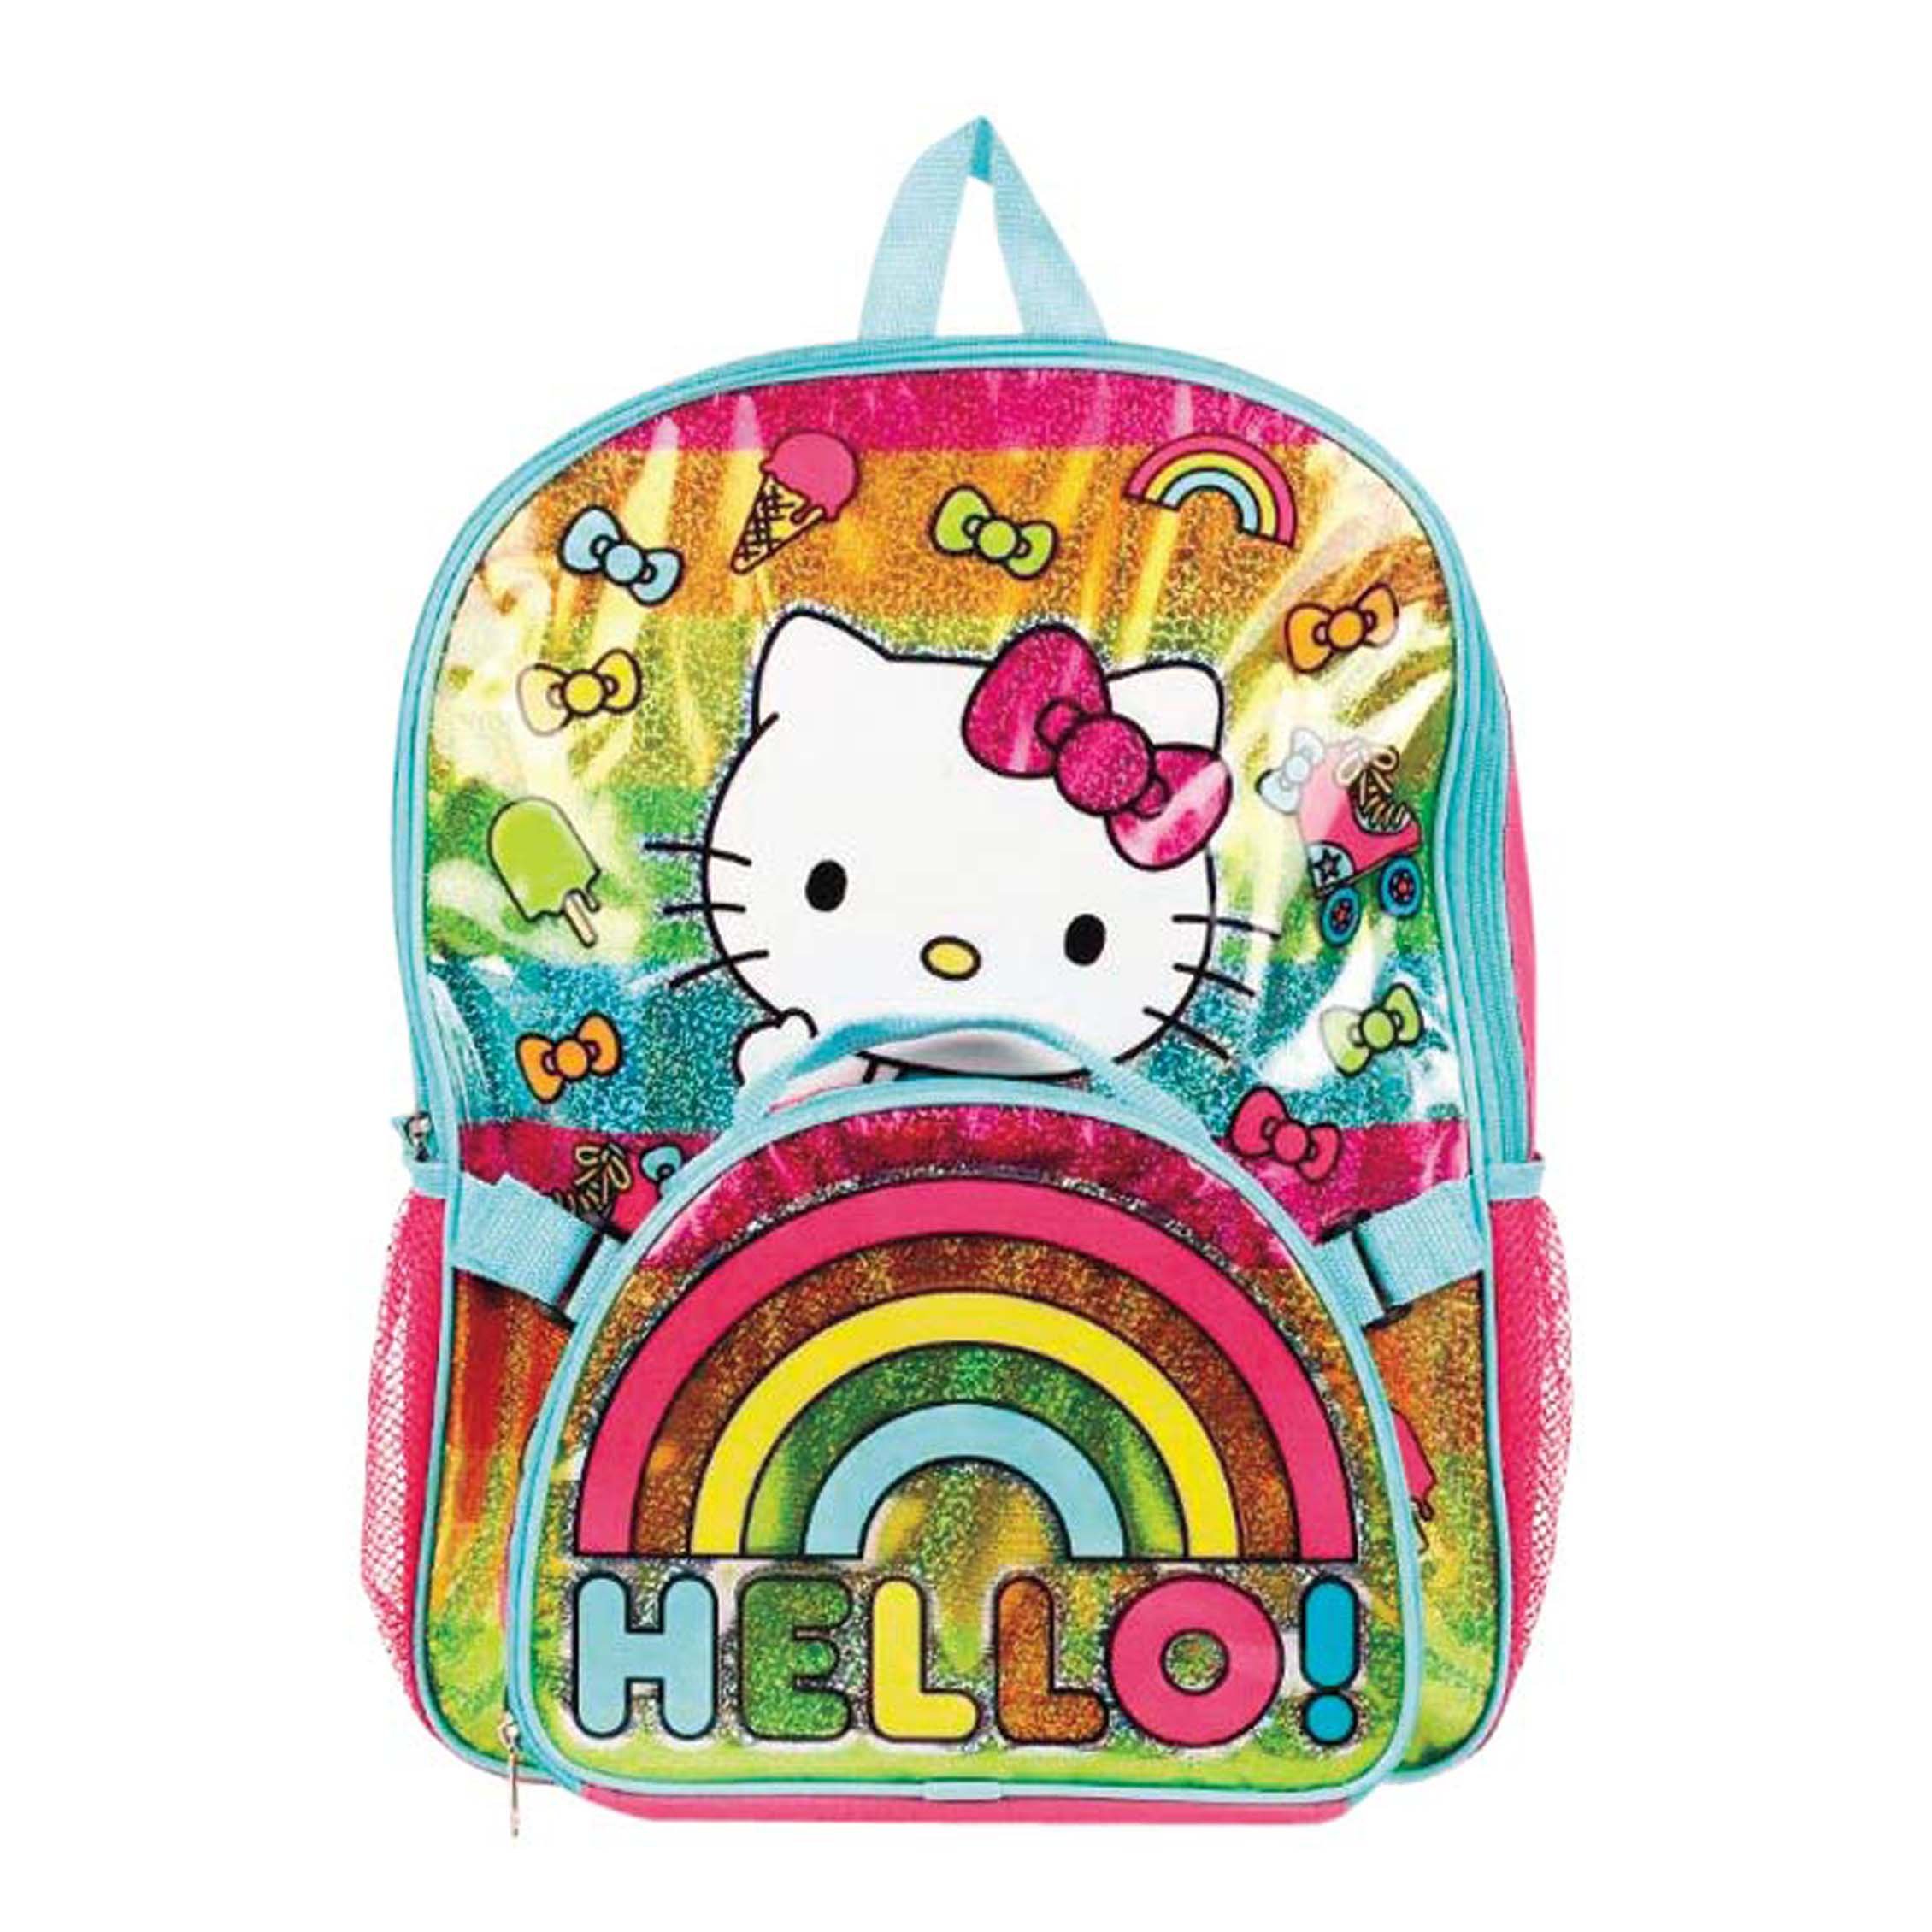 Pokemon Backpack With Lunch Kit - Shop Backpacks at H-E-B